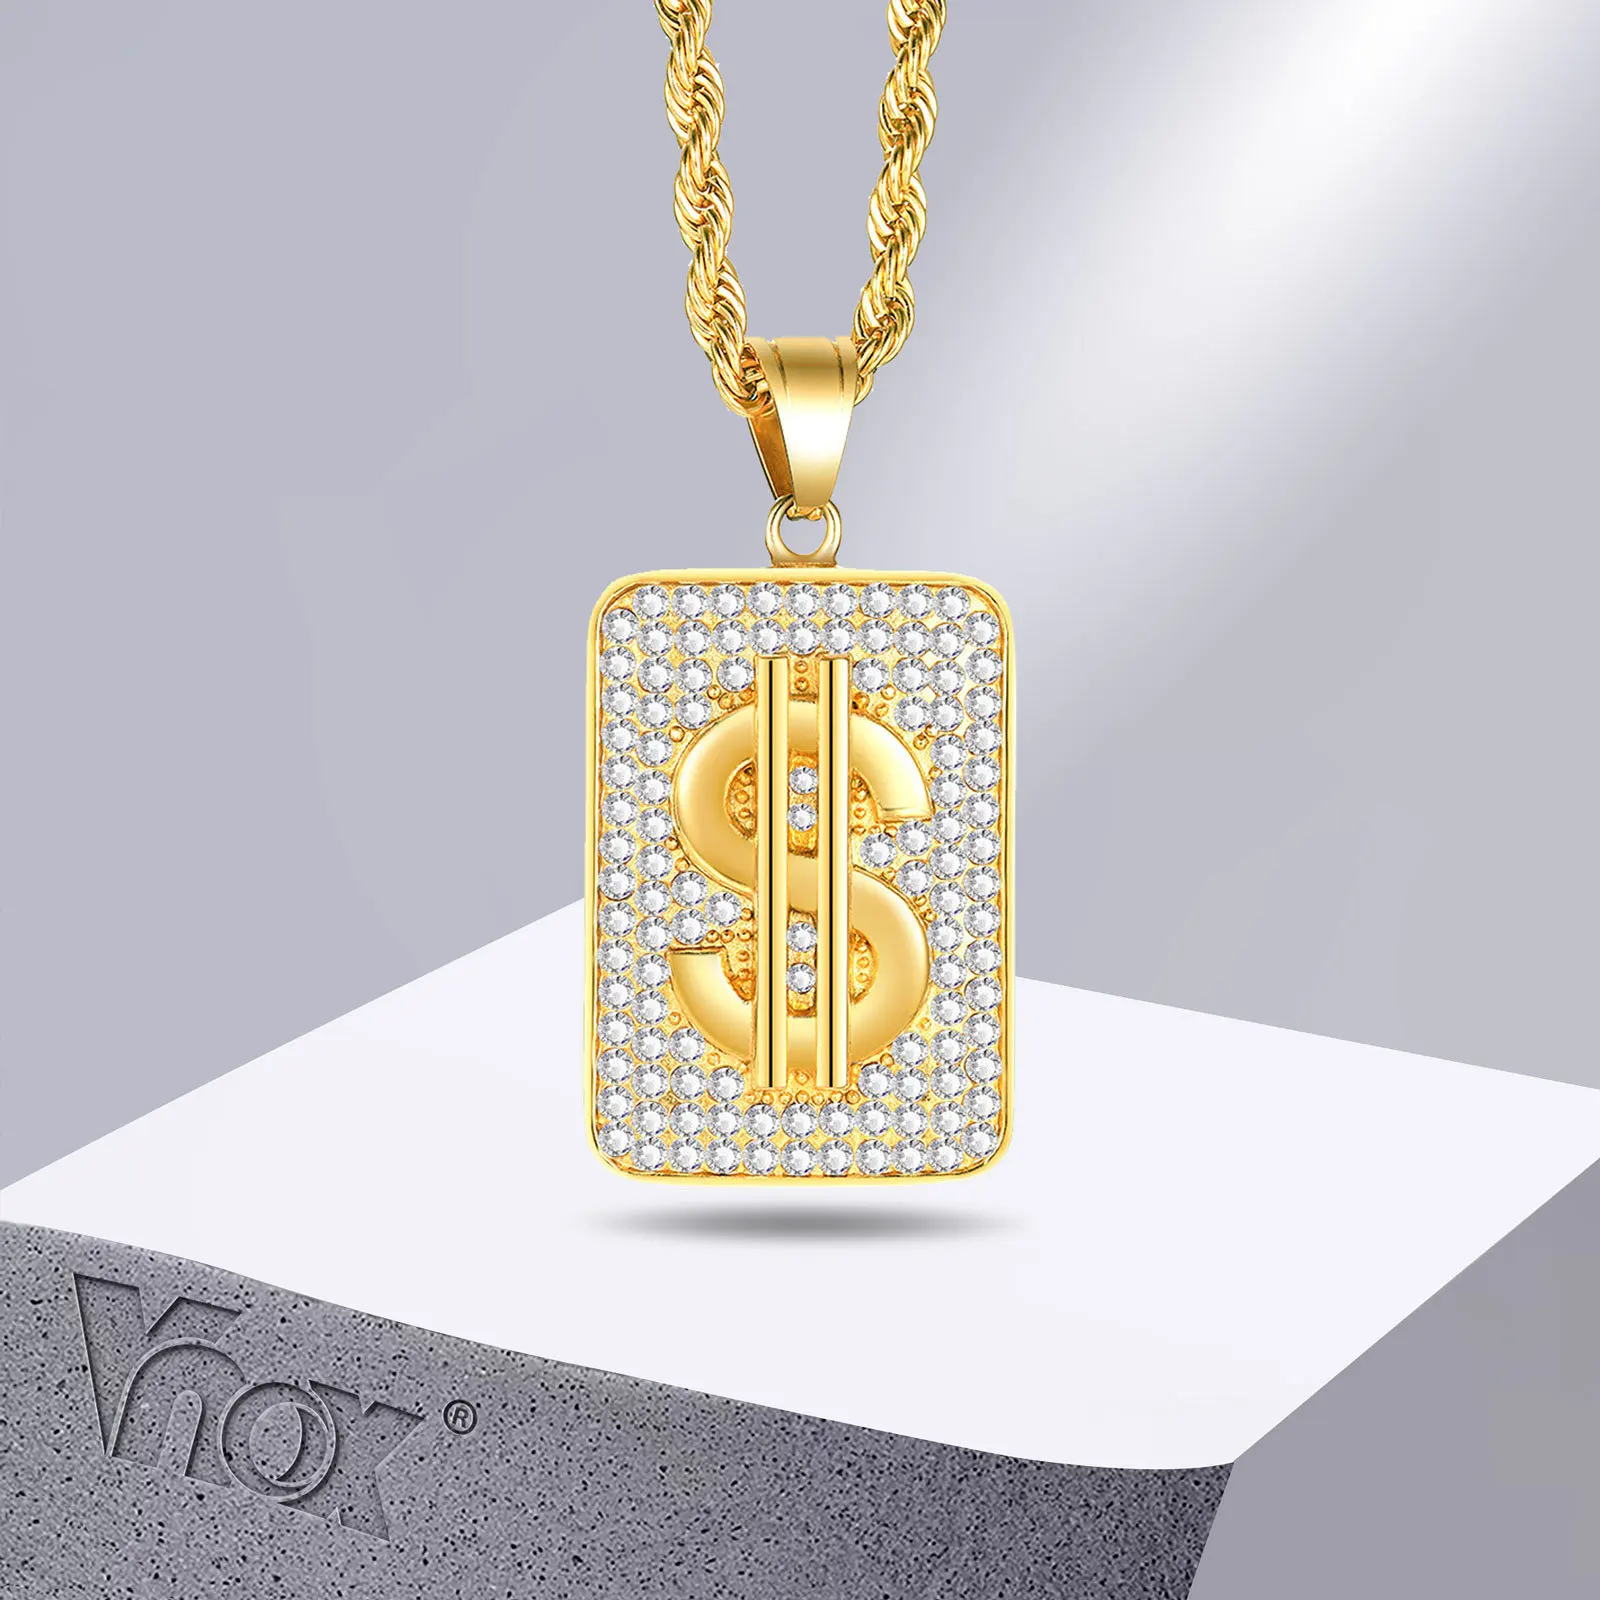 

Vnox Heavy Chunky Necklace for Men,Gold Color Stainless Steel Dollar Pad with Bling AAA CZ Stones Pendant, Punk Rock Boy Jewelry